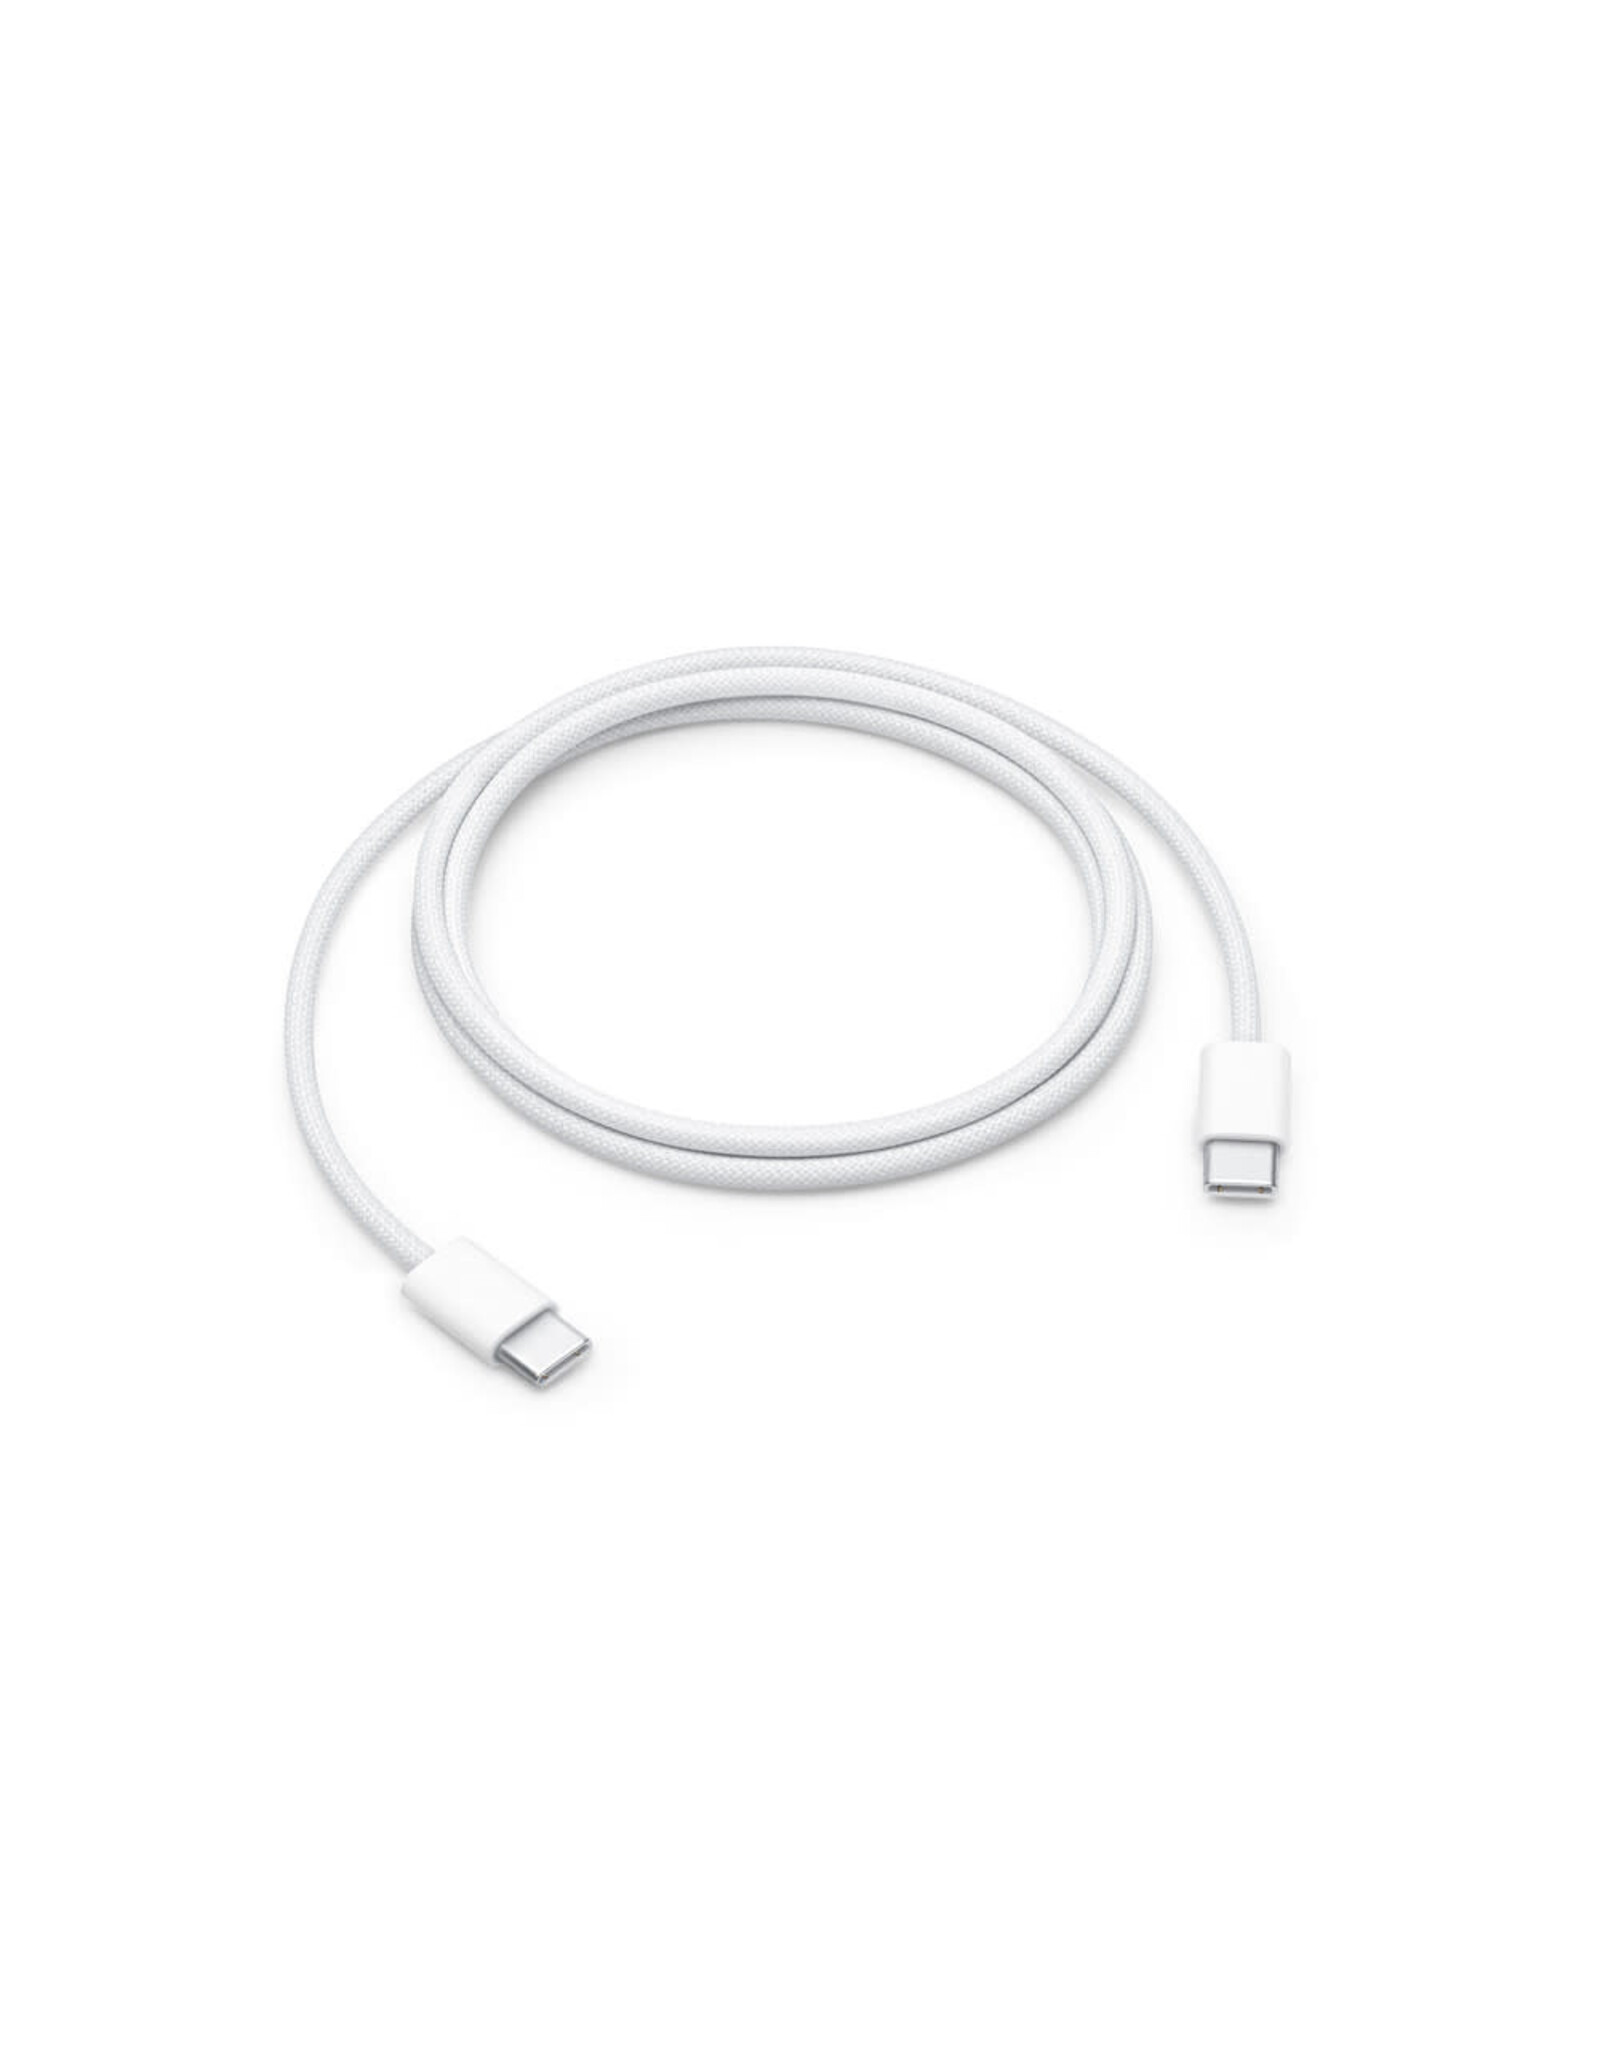 APPLE 60W USB-C CHARGE CABLE (1M)